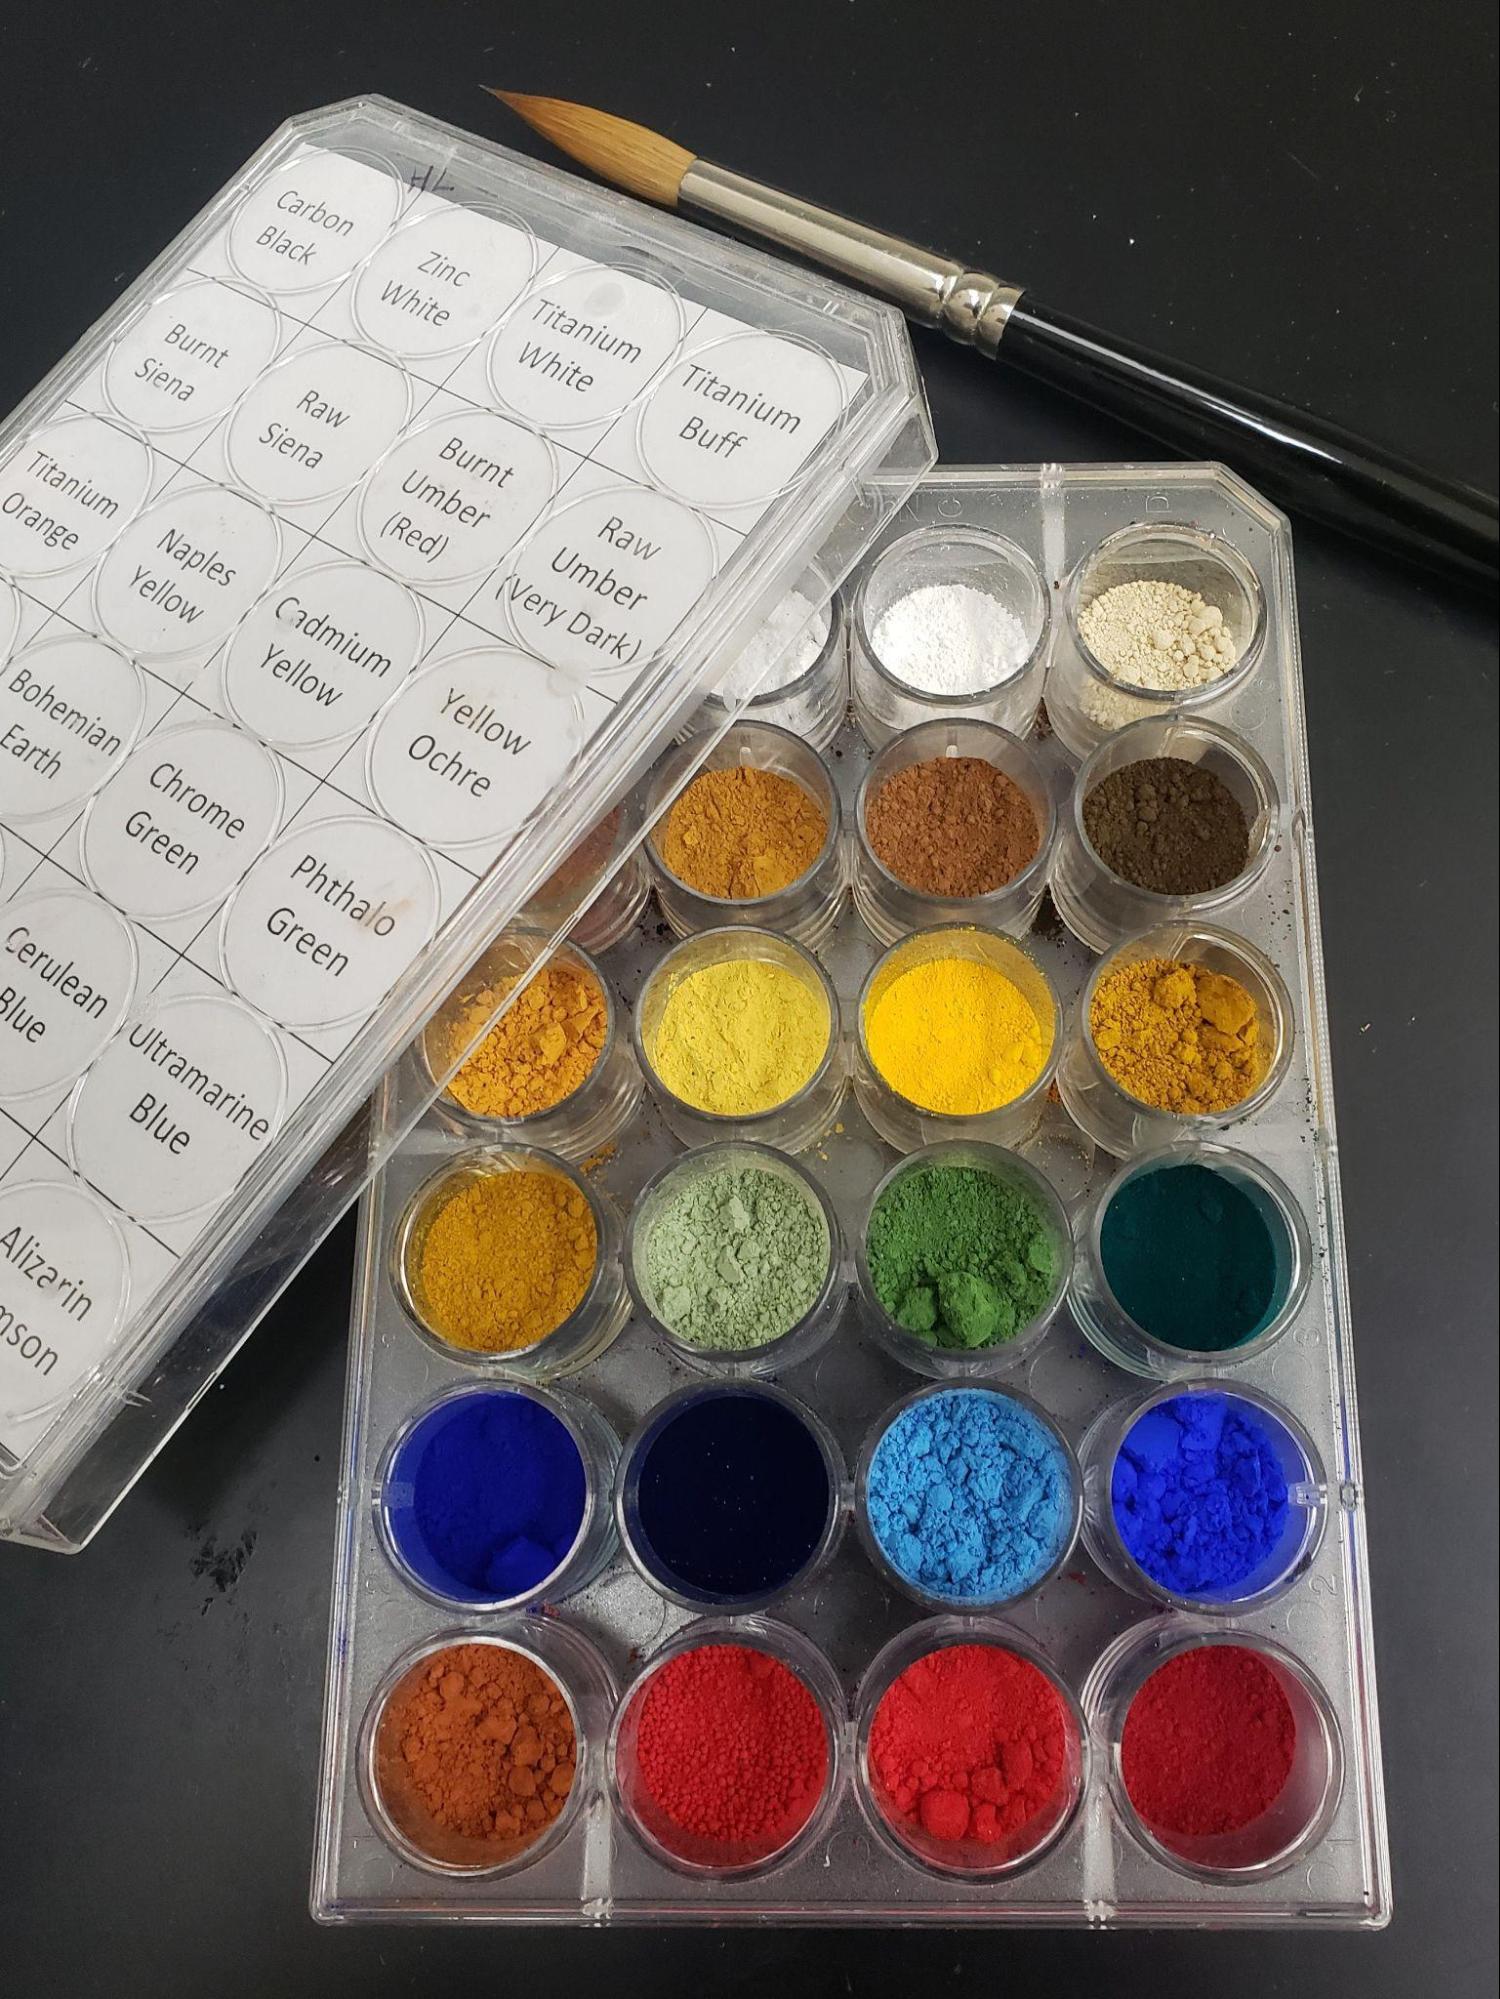 Dry pigments are particularly useful for conservators because they can be mixed to make many colors and work in a variety of binders.